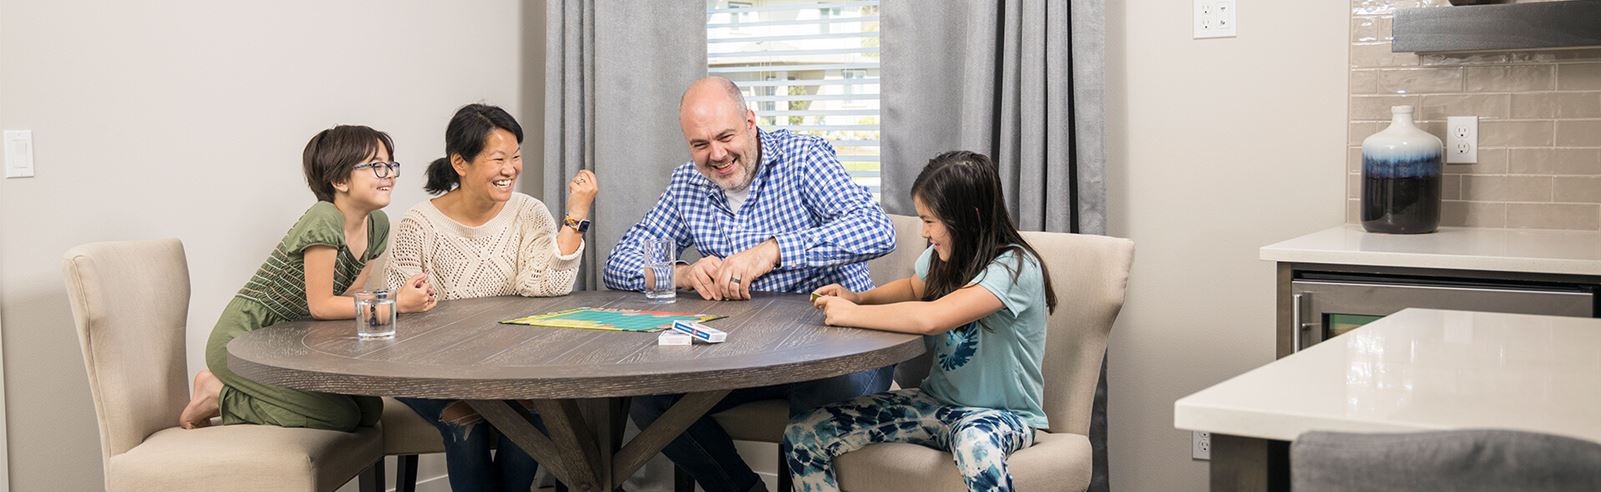 Family of four playing card game at table